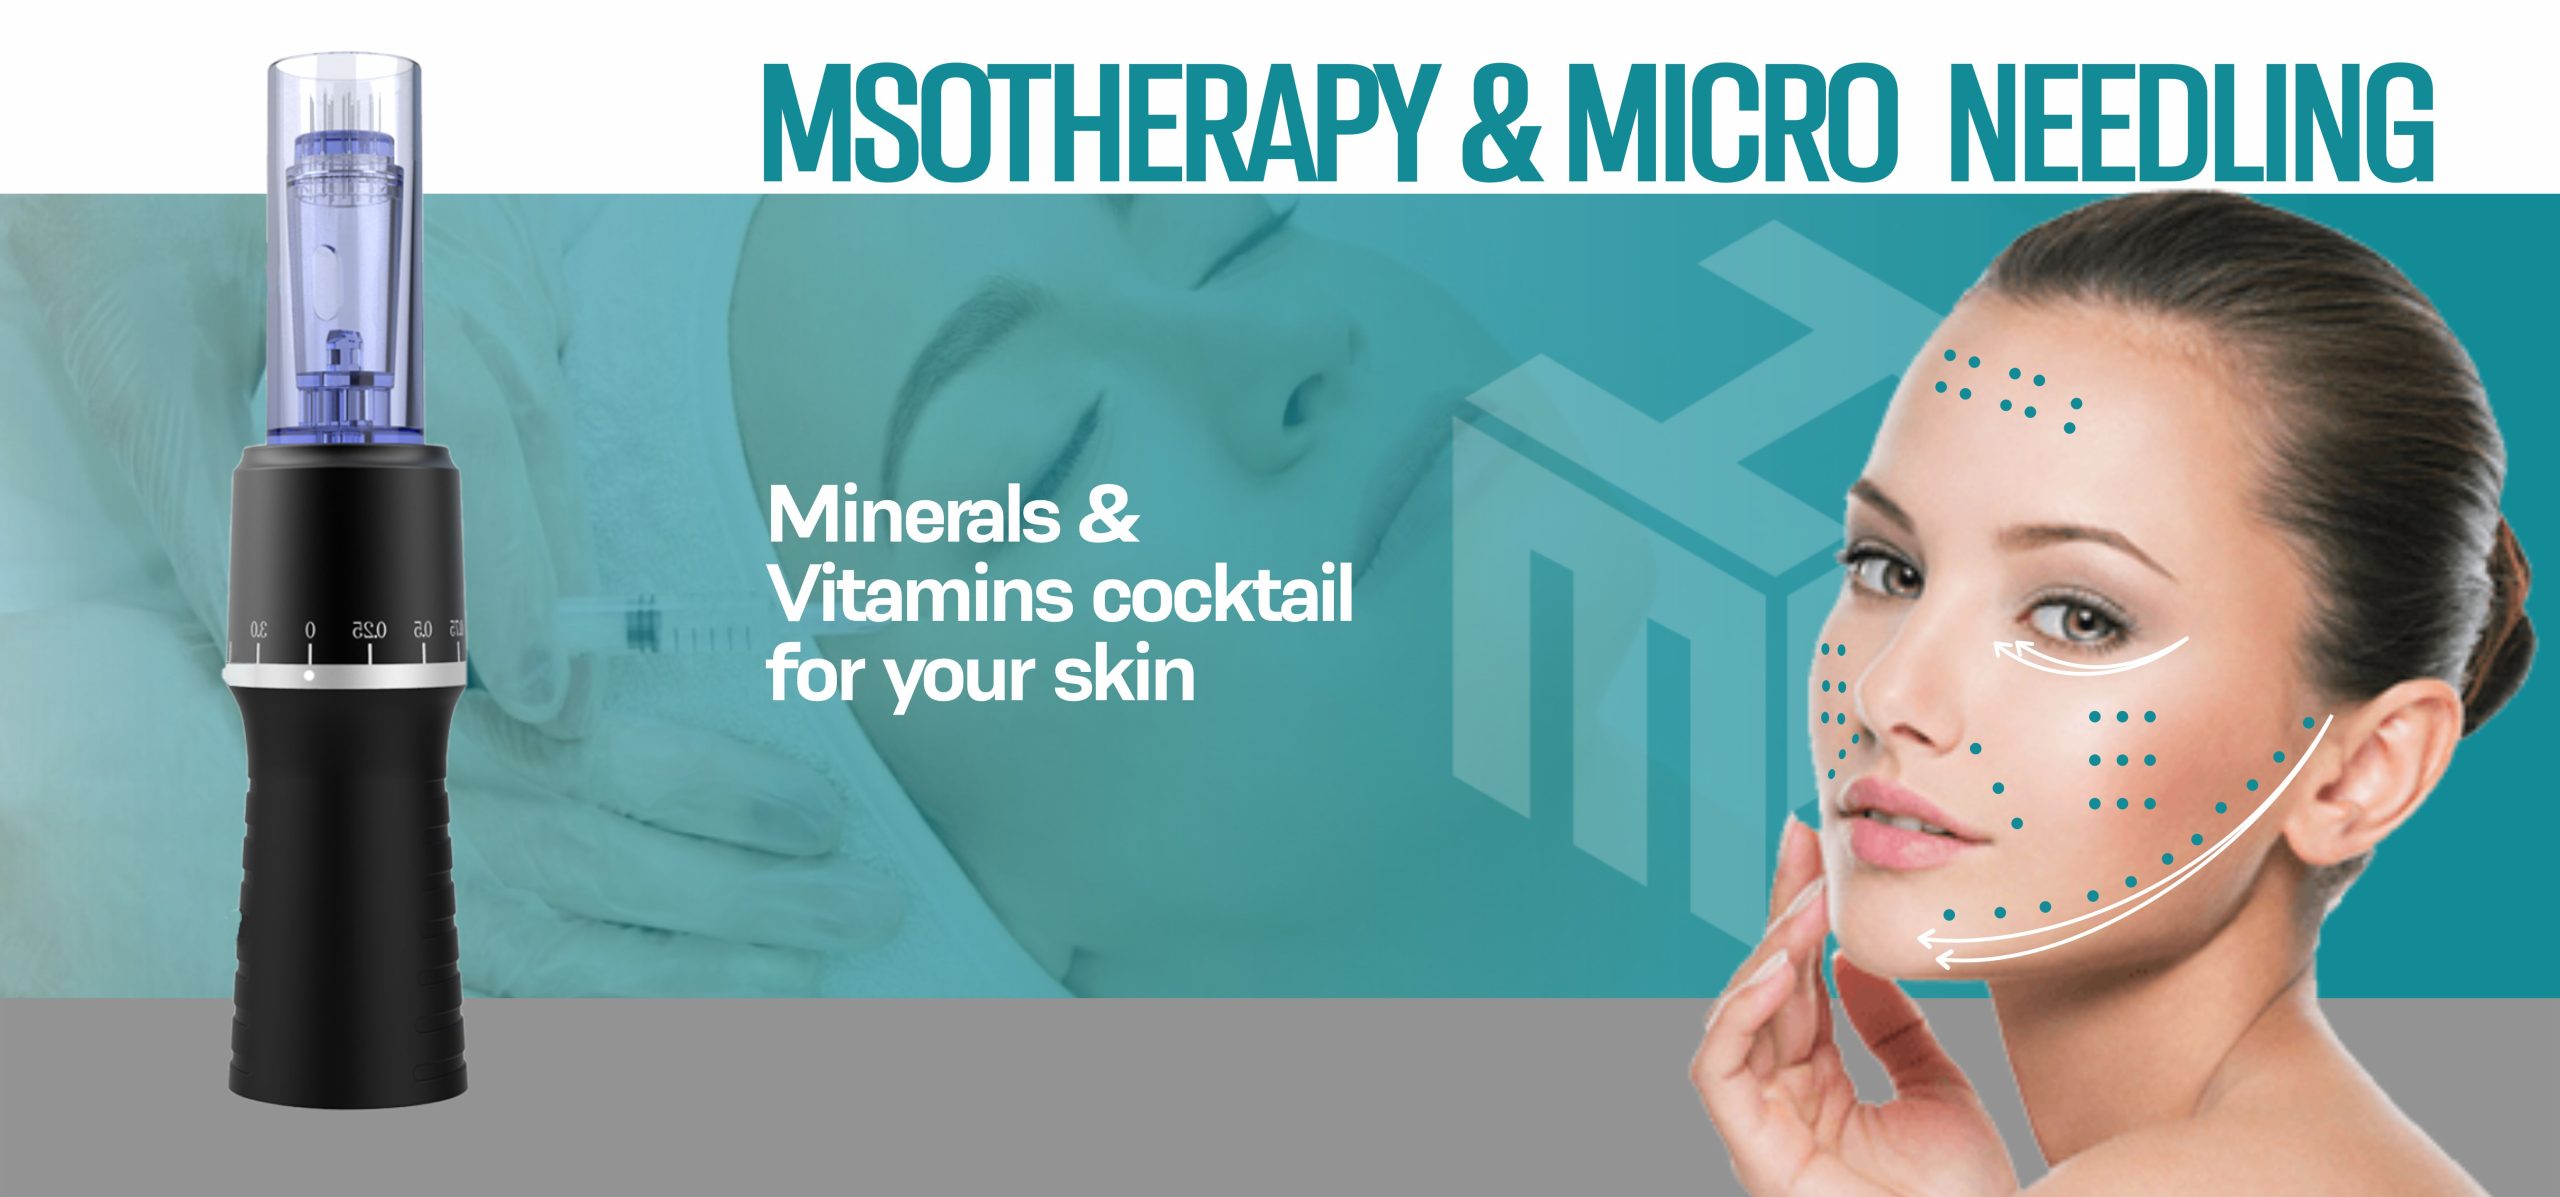 Mesotherapy and Microneedling